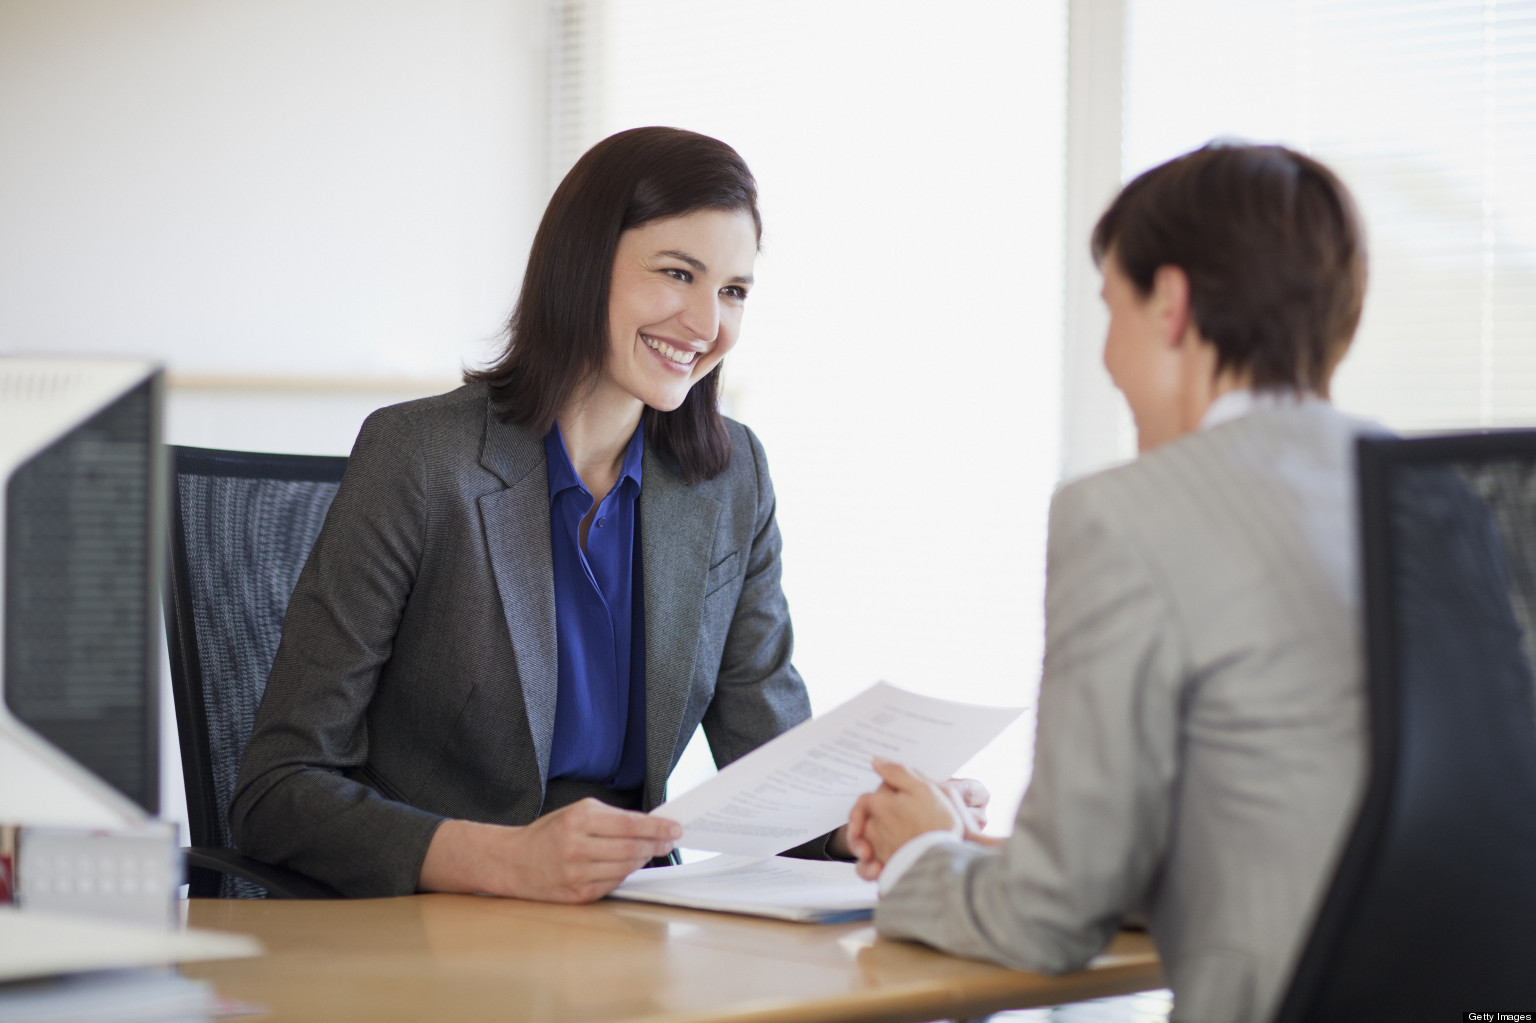 How to follow up after an interview